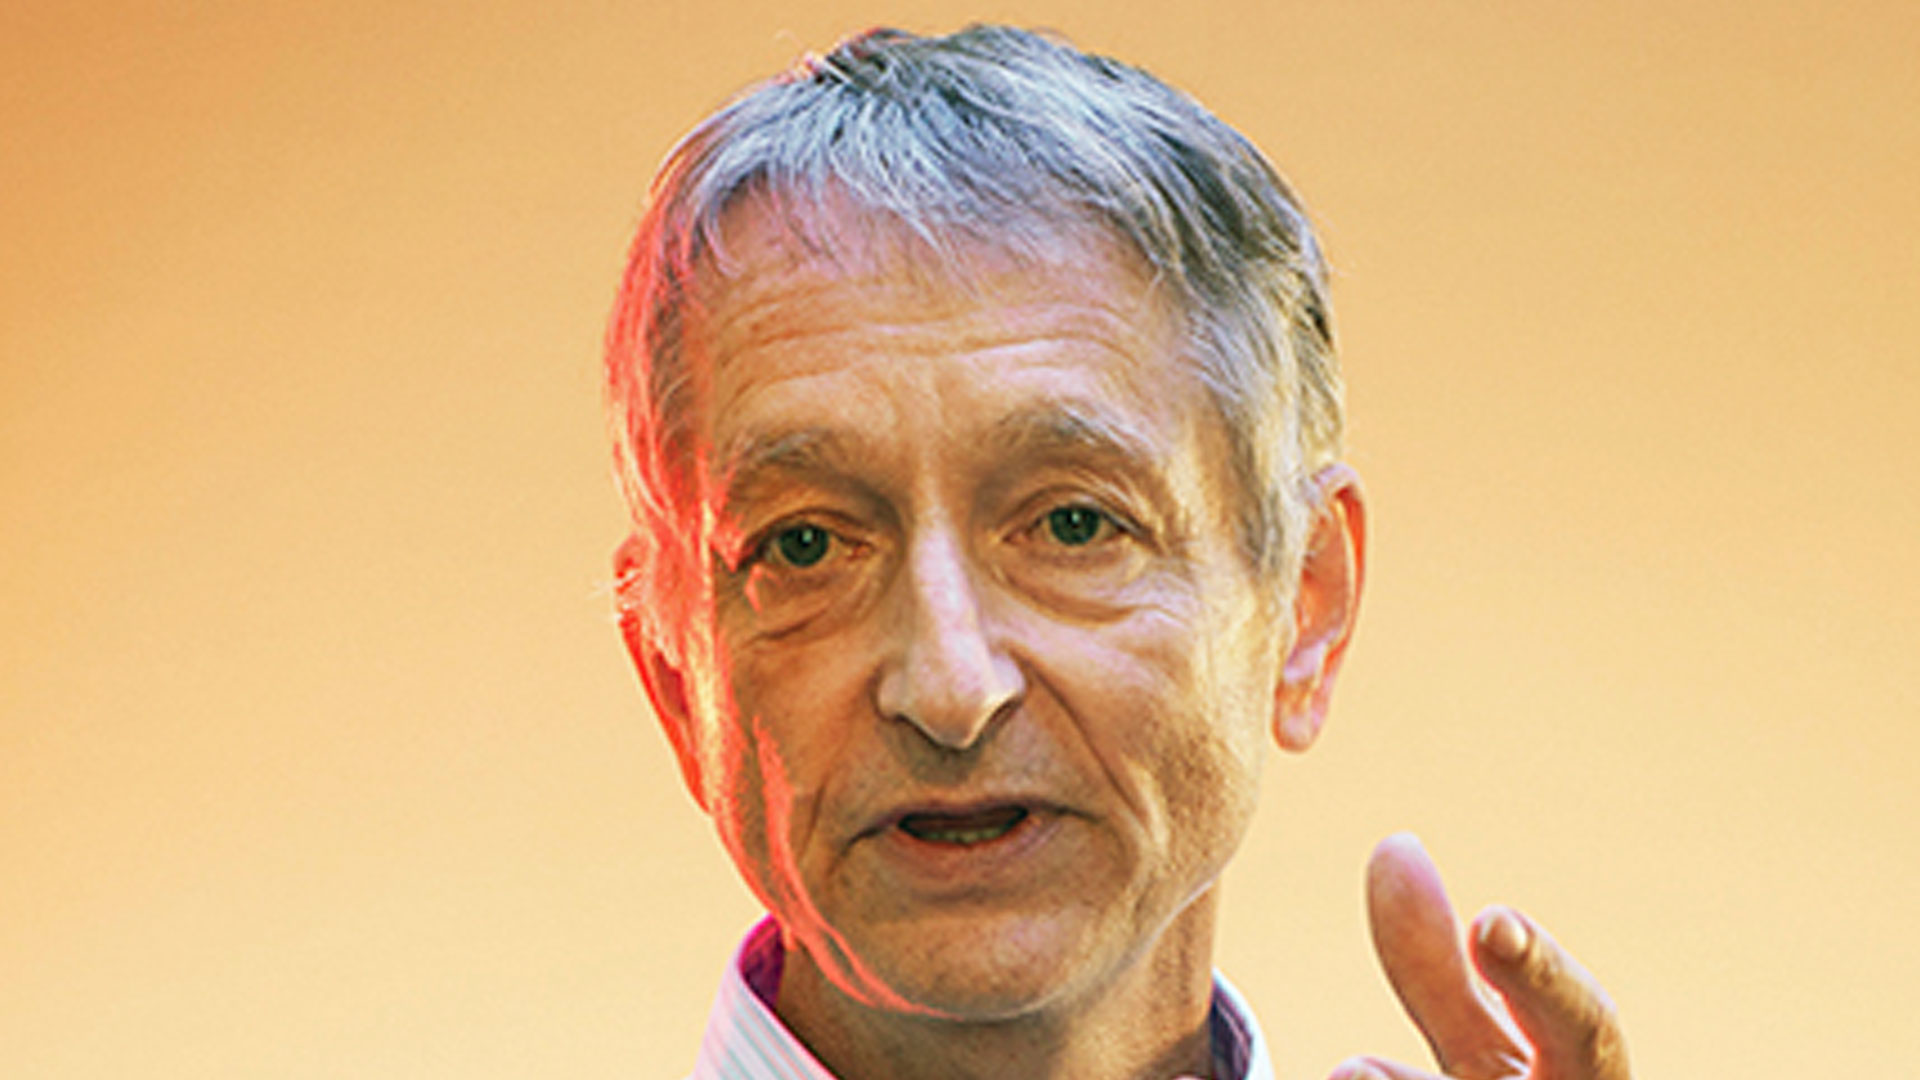 Geoffrey Hinton: Who is he and why has he left Google?